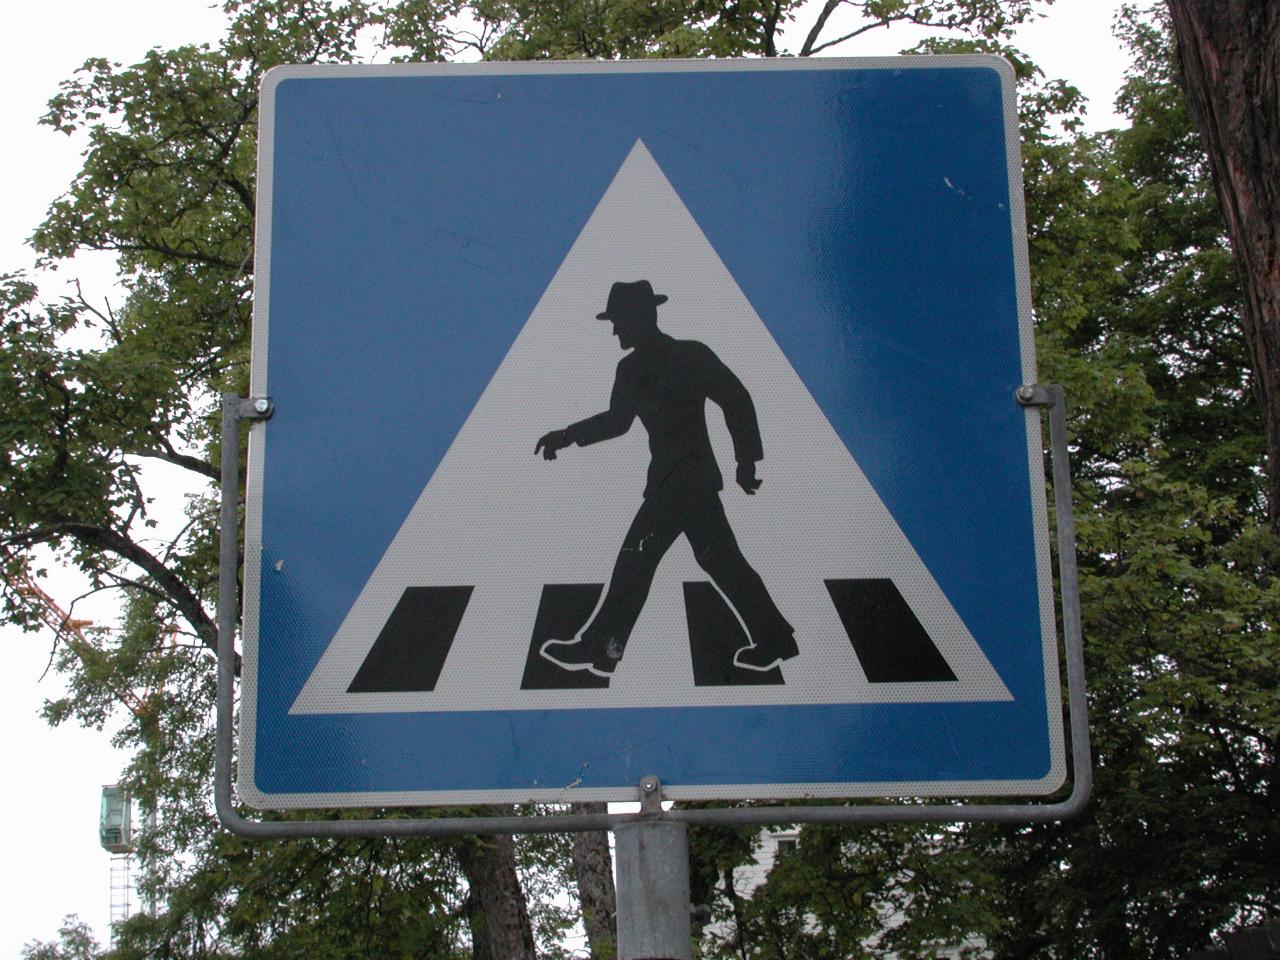 KPLU Viking Jazz: Crossing signs are a little dated (man wearing a hat!)